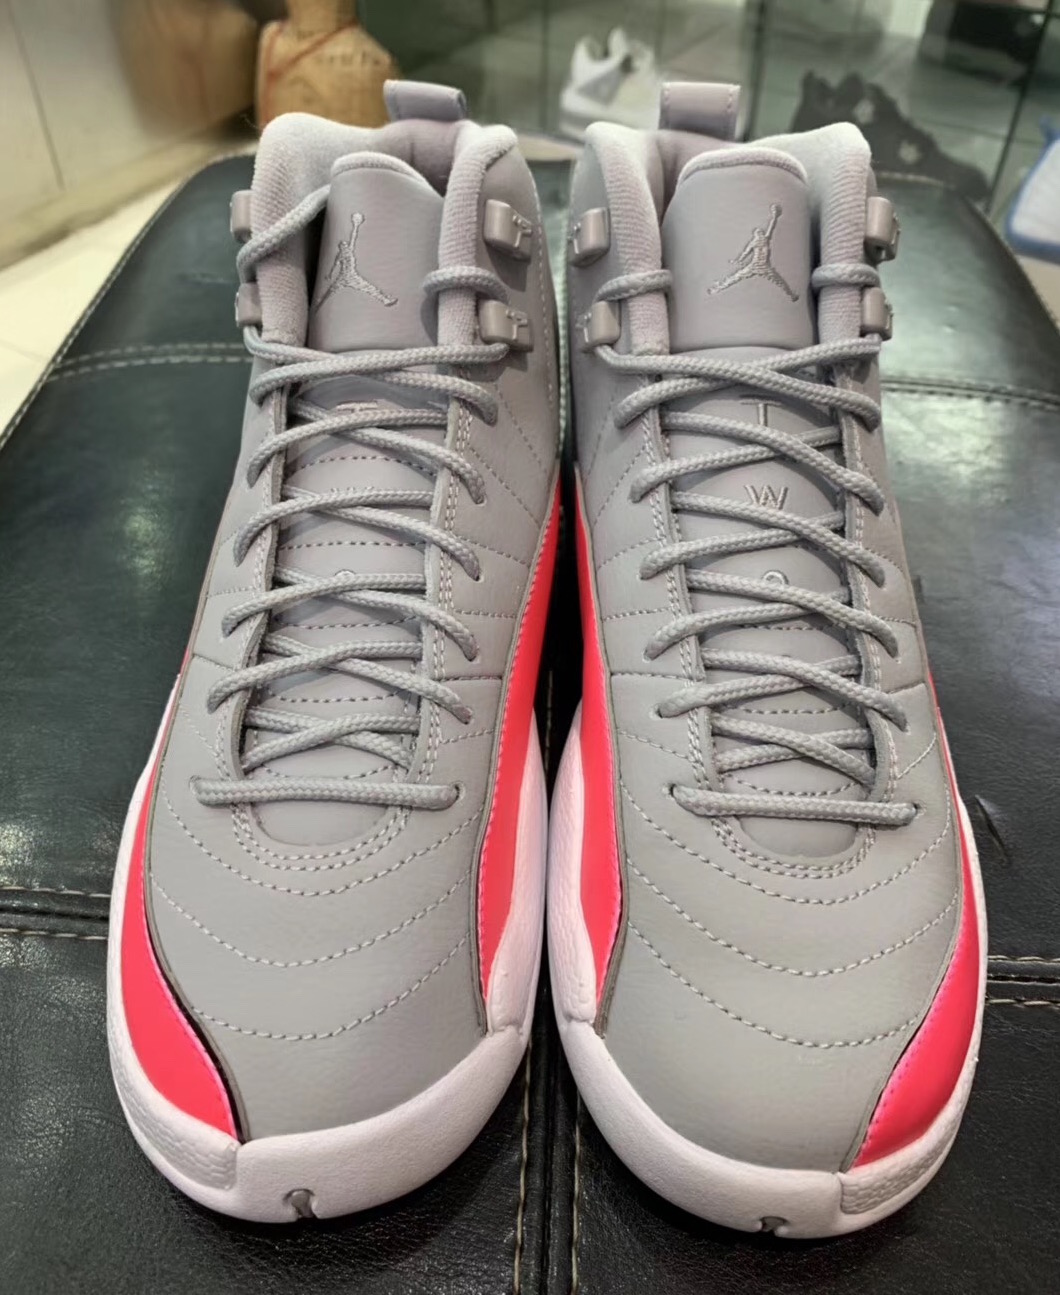 pink and gray 12s jordans \u003e Up to 64 